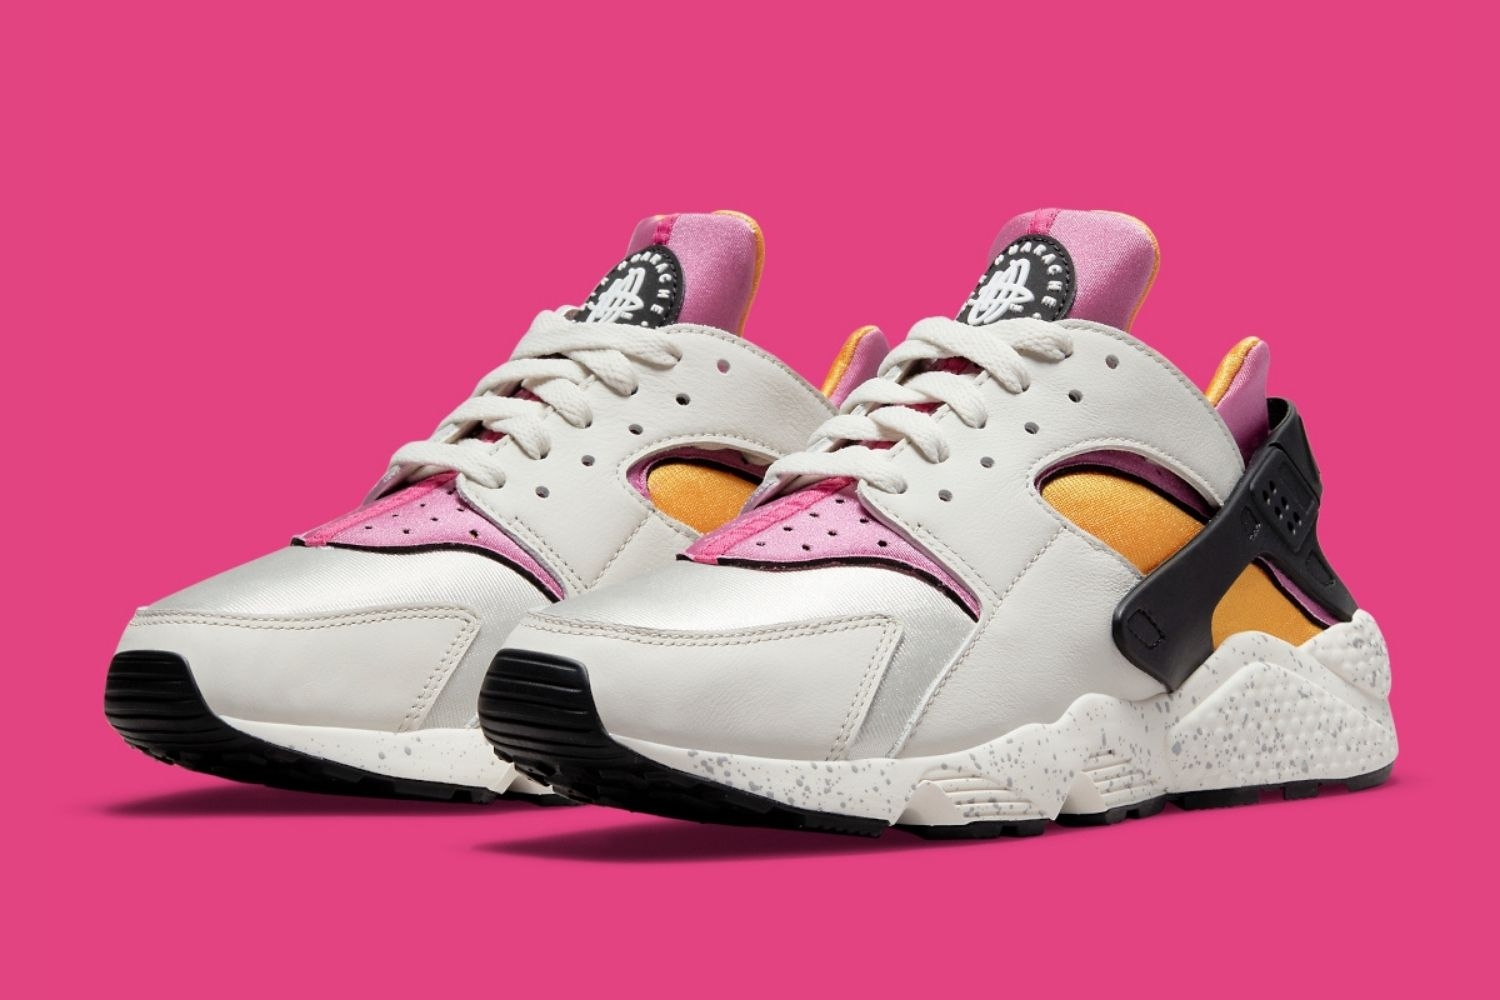 Nike unveils Air Huarache 'Lethal Pink' for 2022